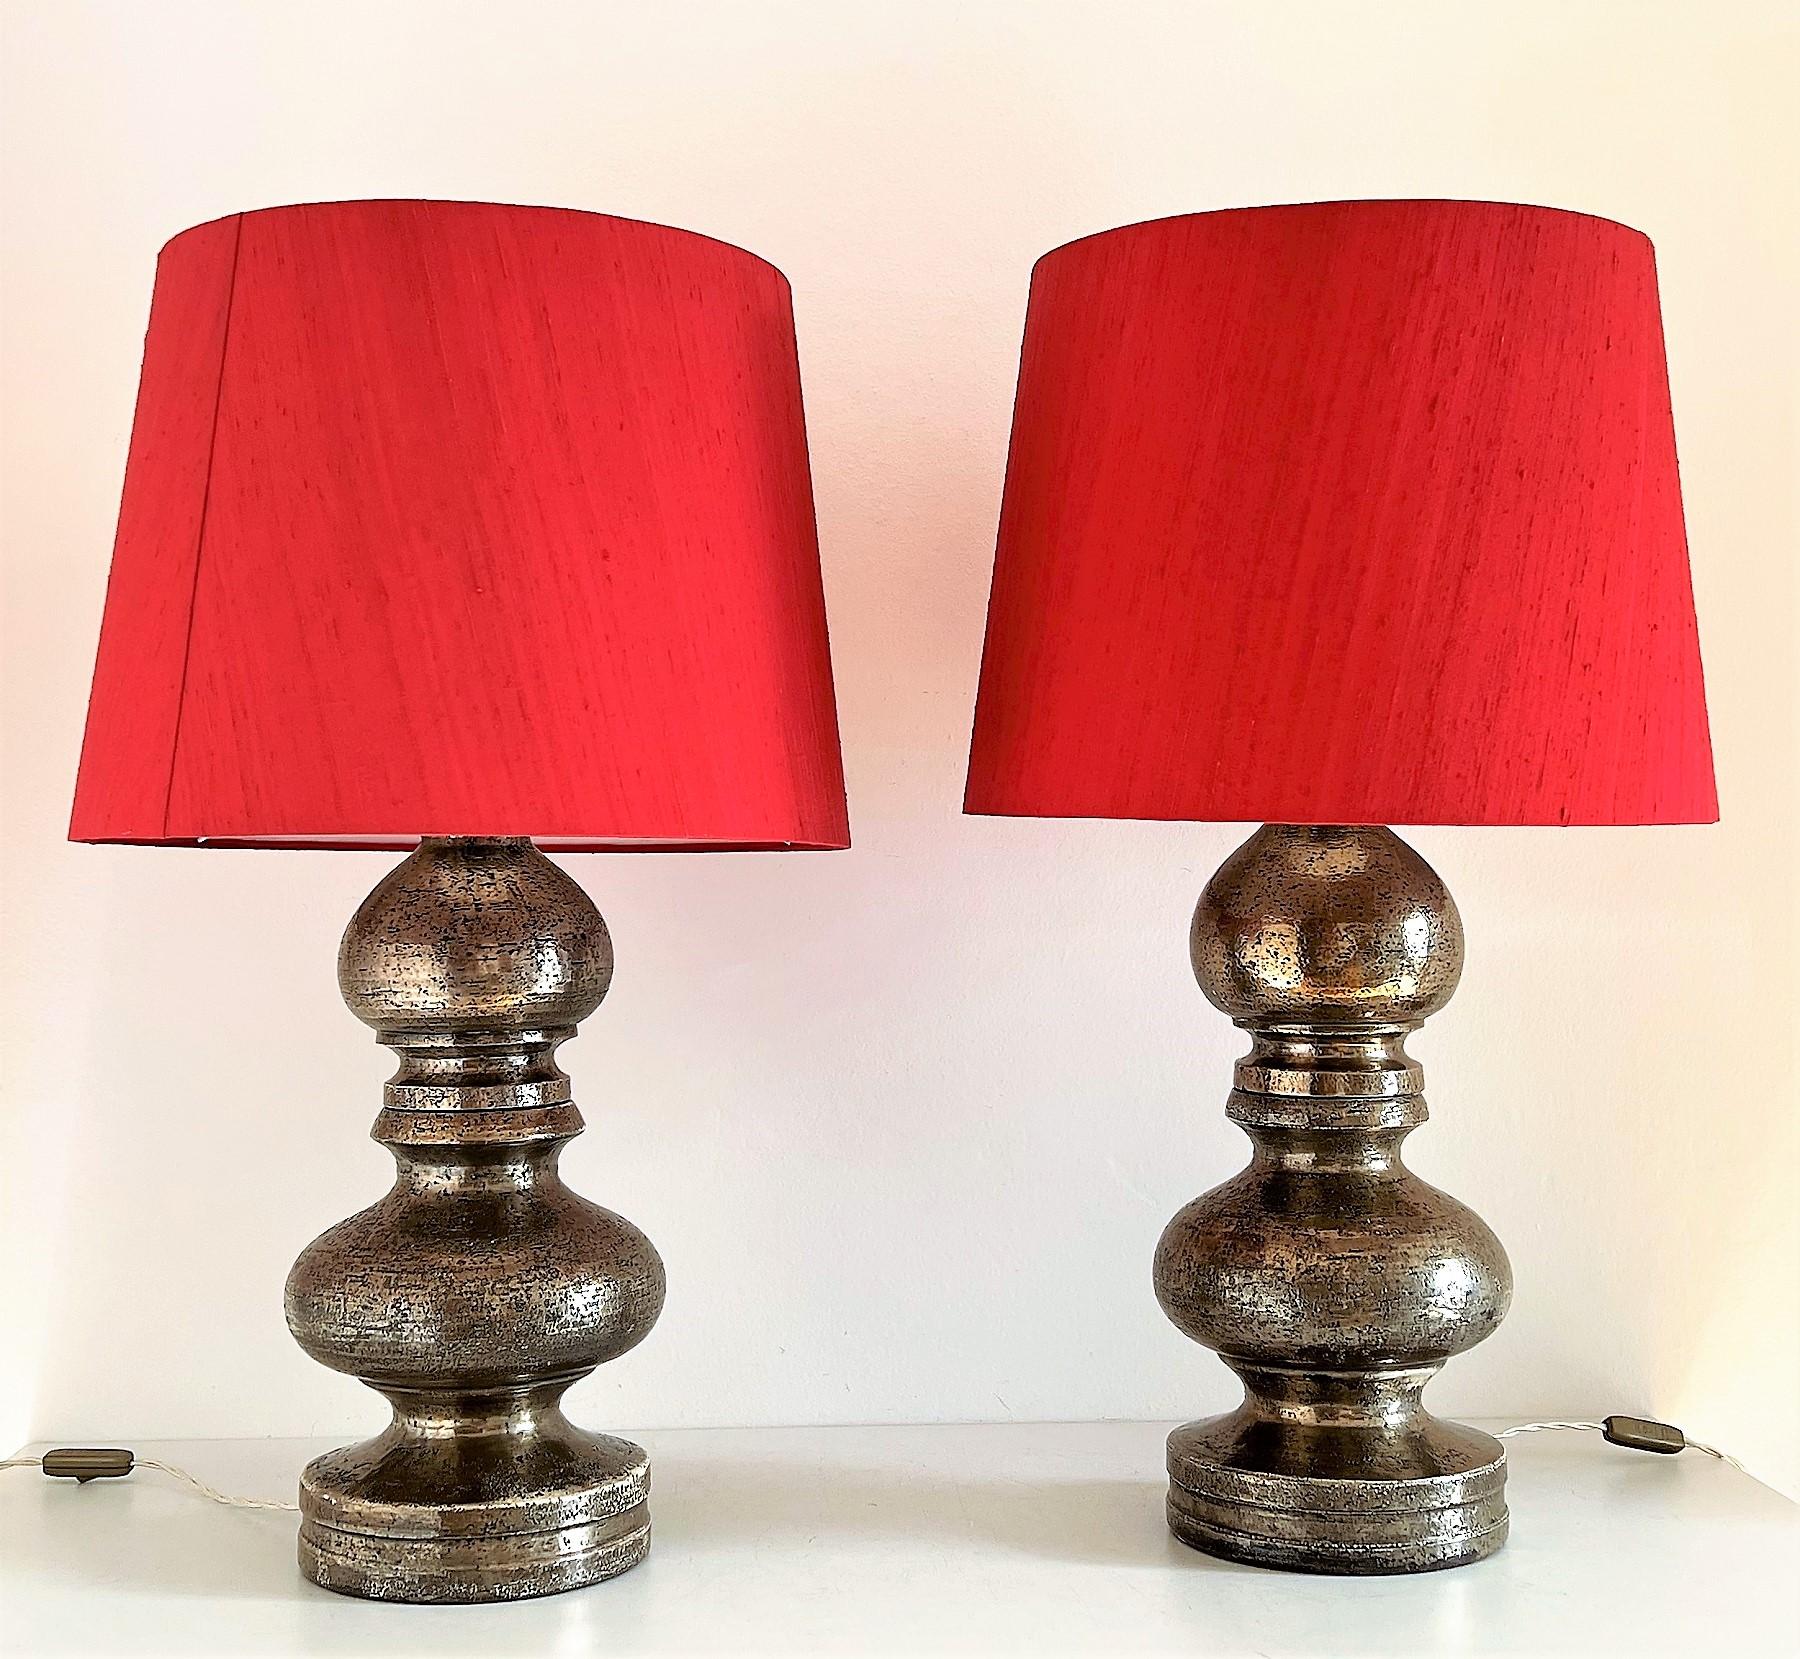 Italian Mid-Century Large Pottery Table Lamps by Aldo Londi for Bitossi, 1960s For Sale 3